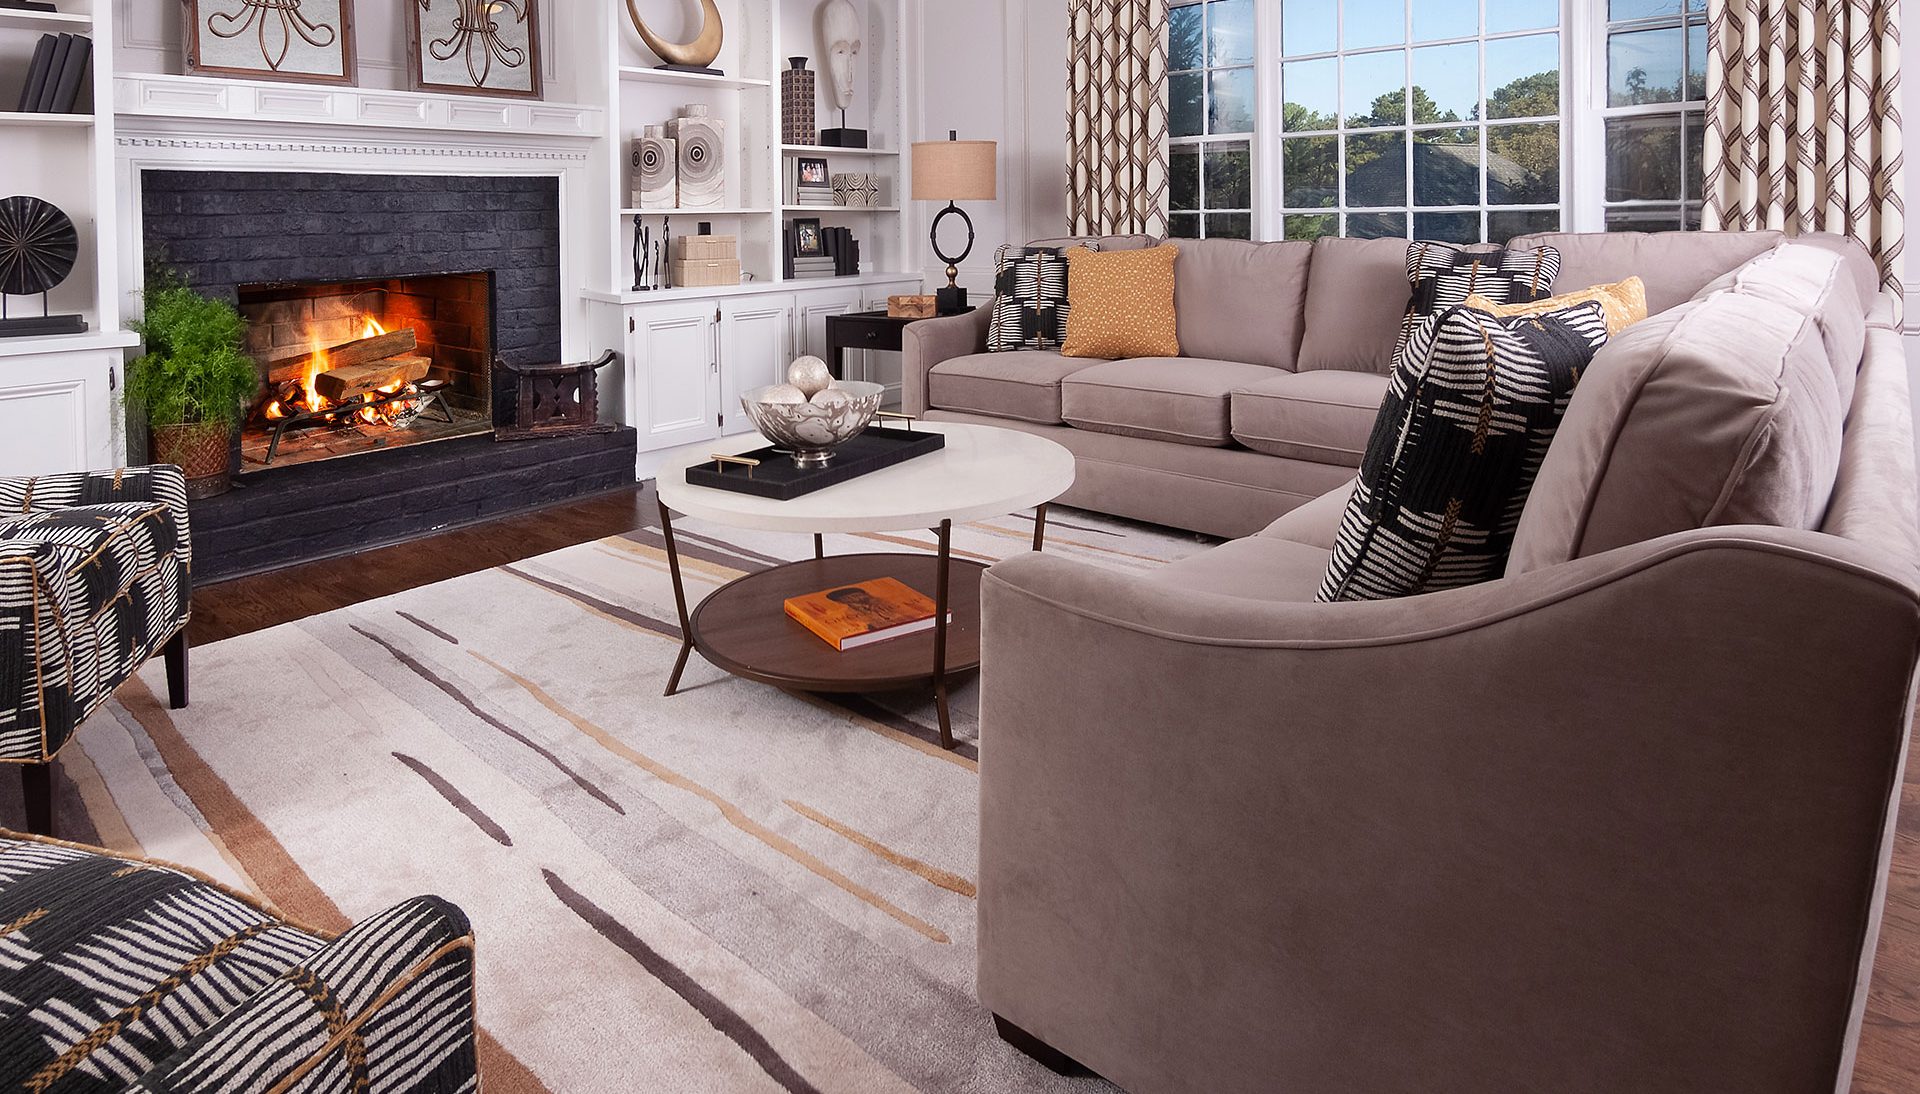 Seasonal Transition Tips How to Transform Your Living Room From a Summer to Fall Feel